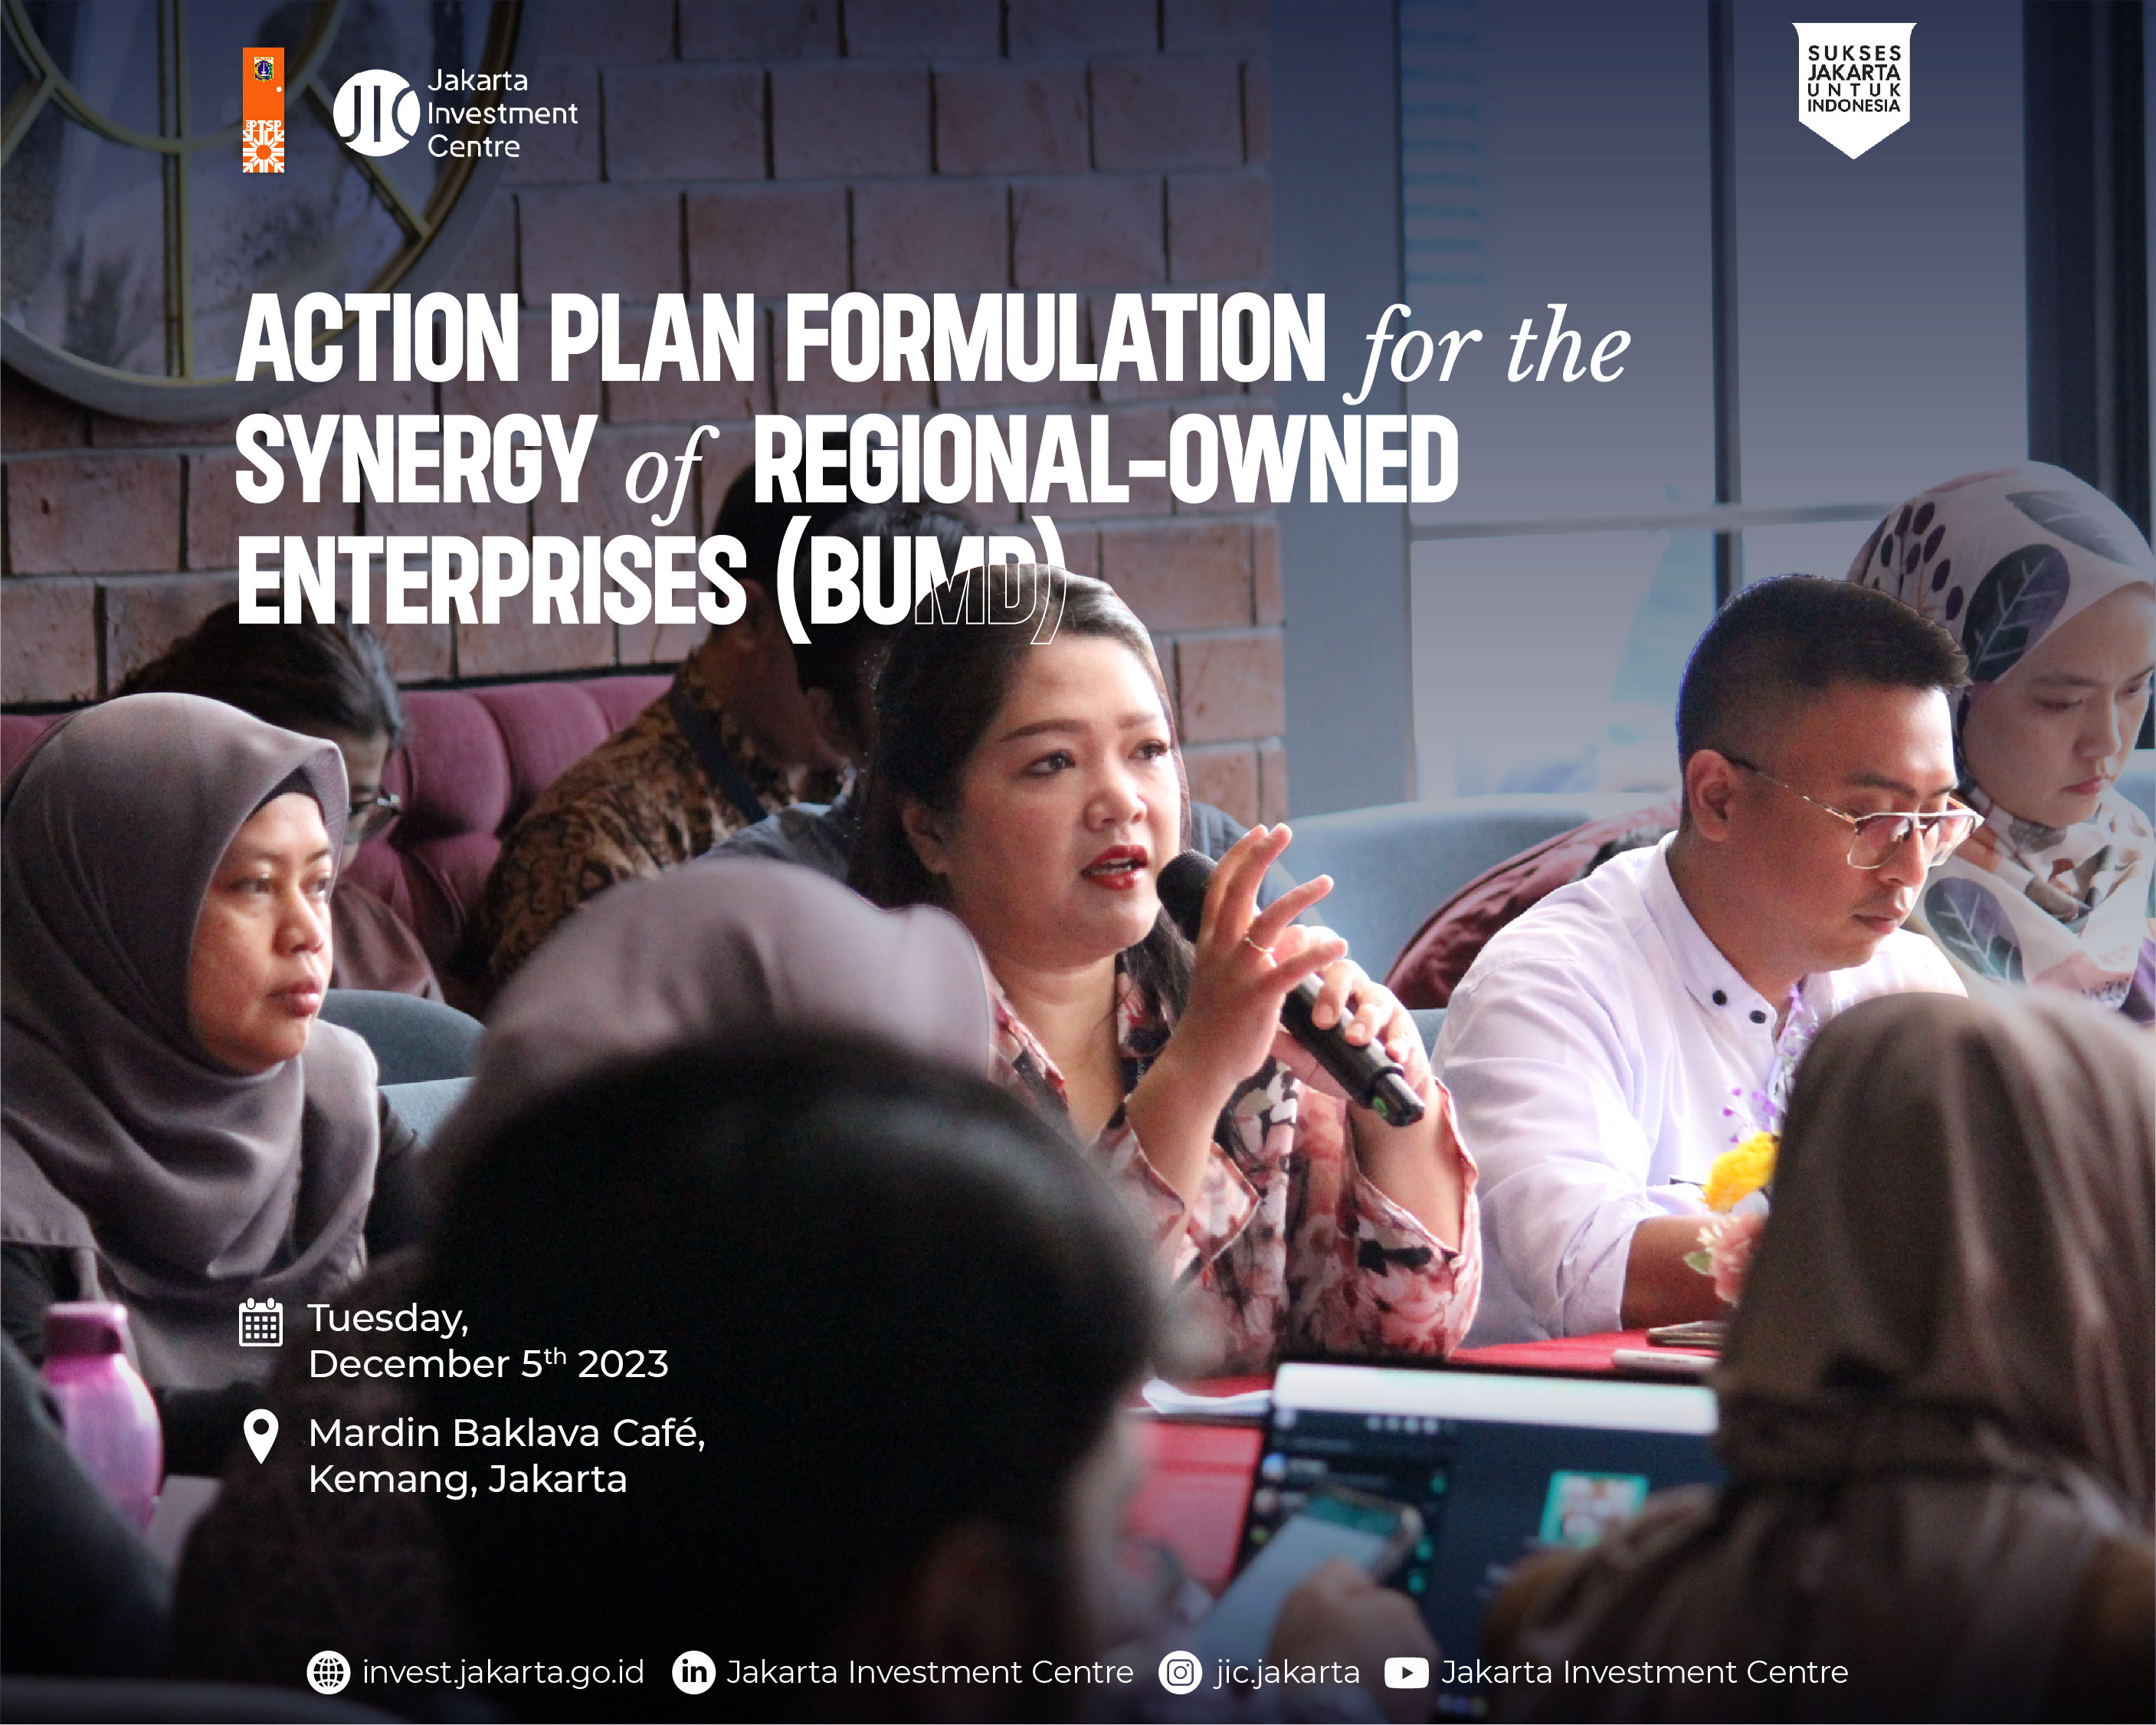 Action Plan Formulation for the Synergy of Regional-Owned Corporations (BUMD)